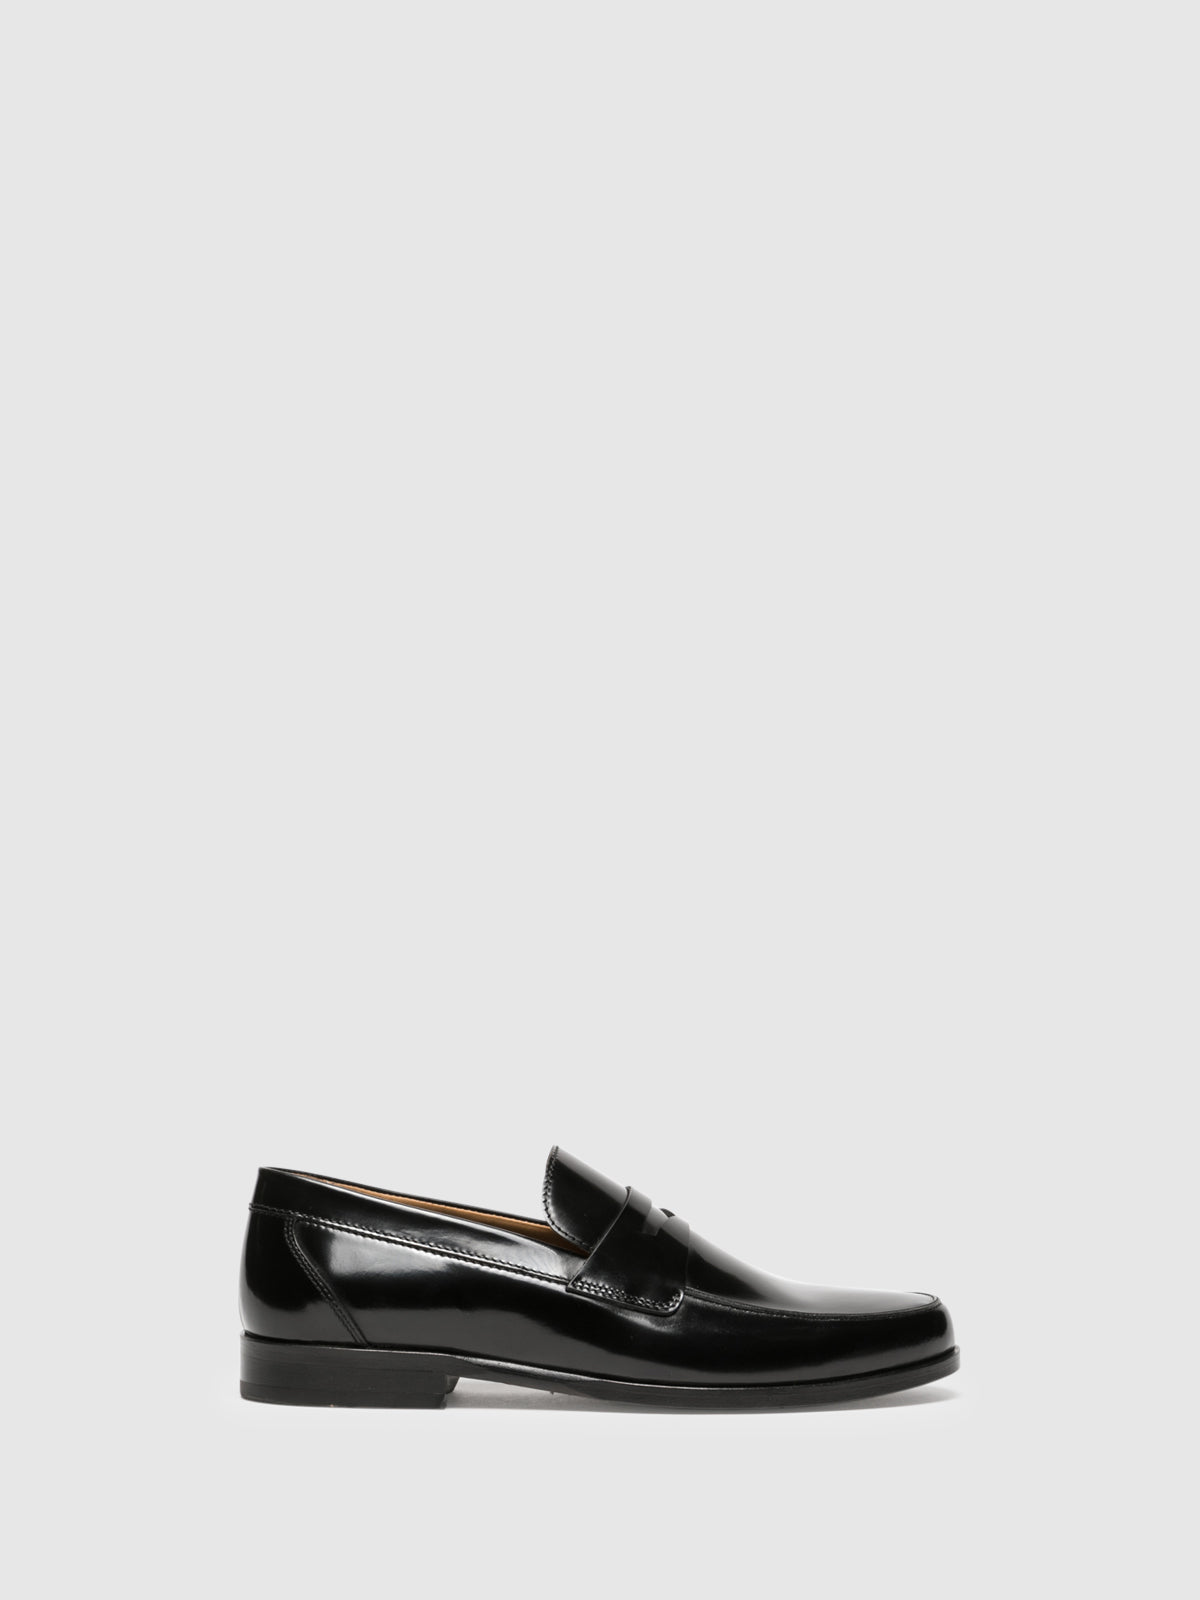 Yucca Black Loafers Shoes